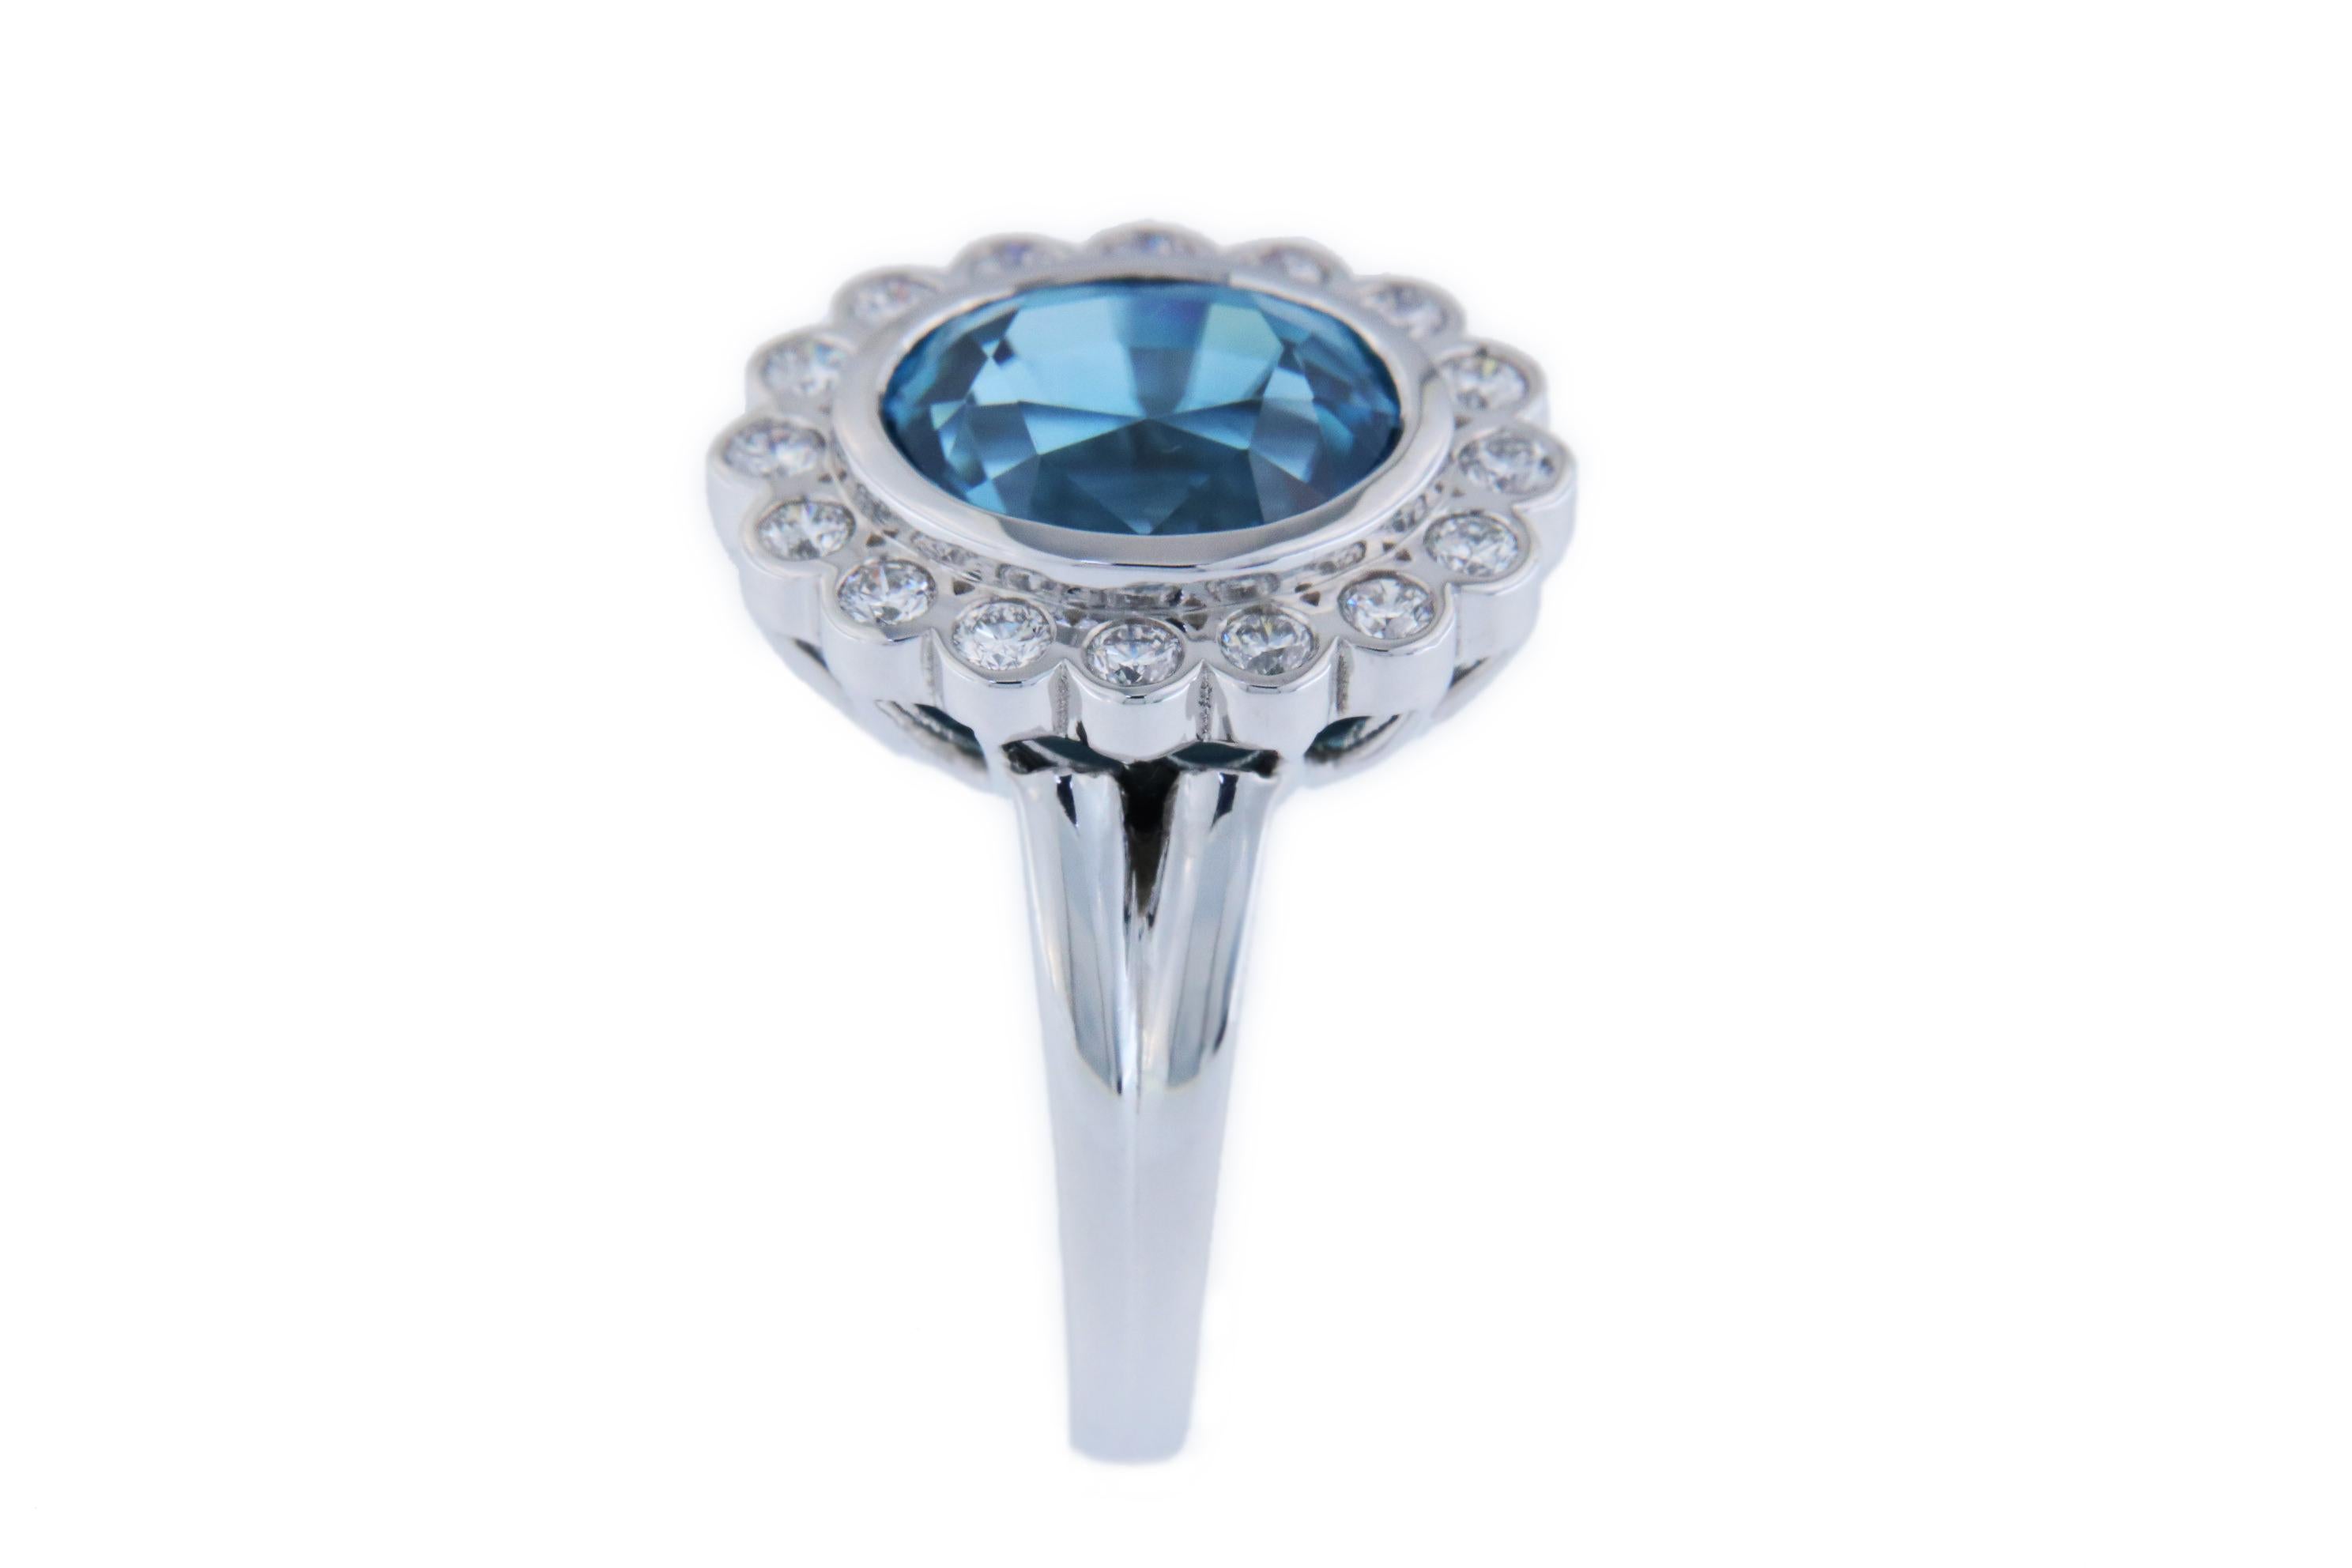 Contemporary Orloff of Denmark, 6 ct Natural Blue Zircon Diamond Ring in 925 Sterling Silver For Sale